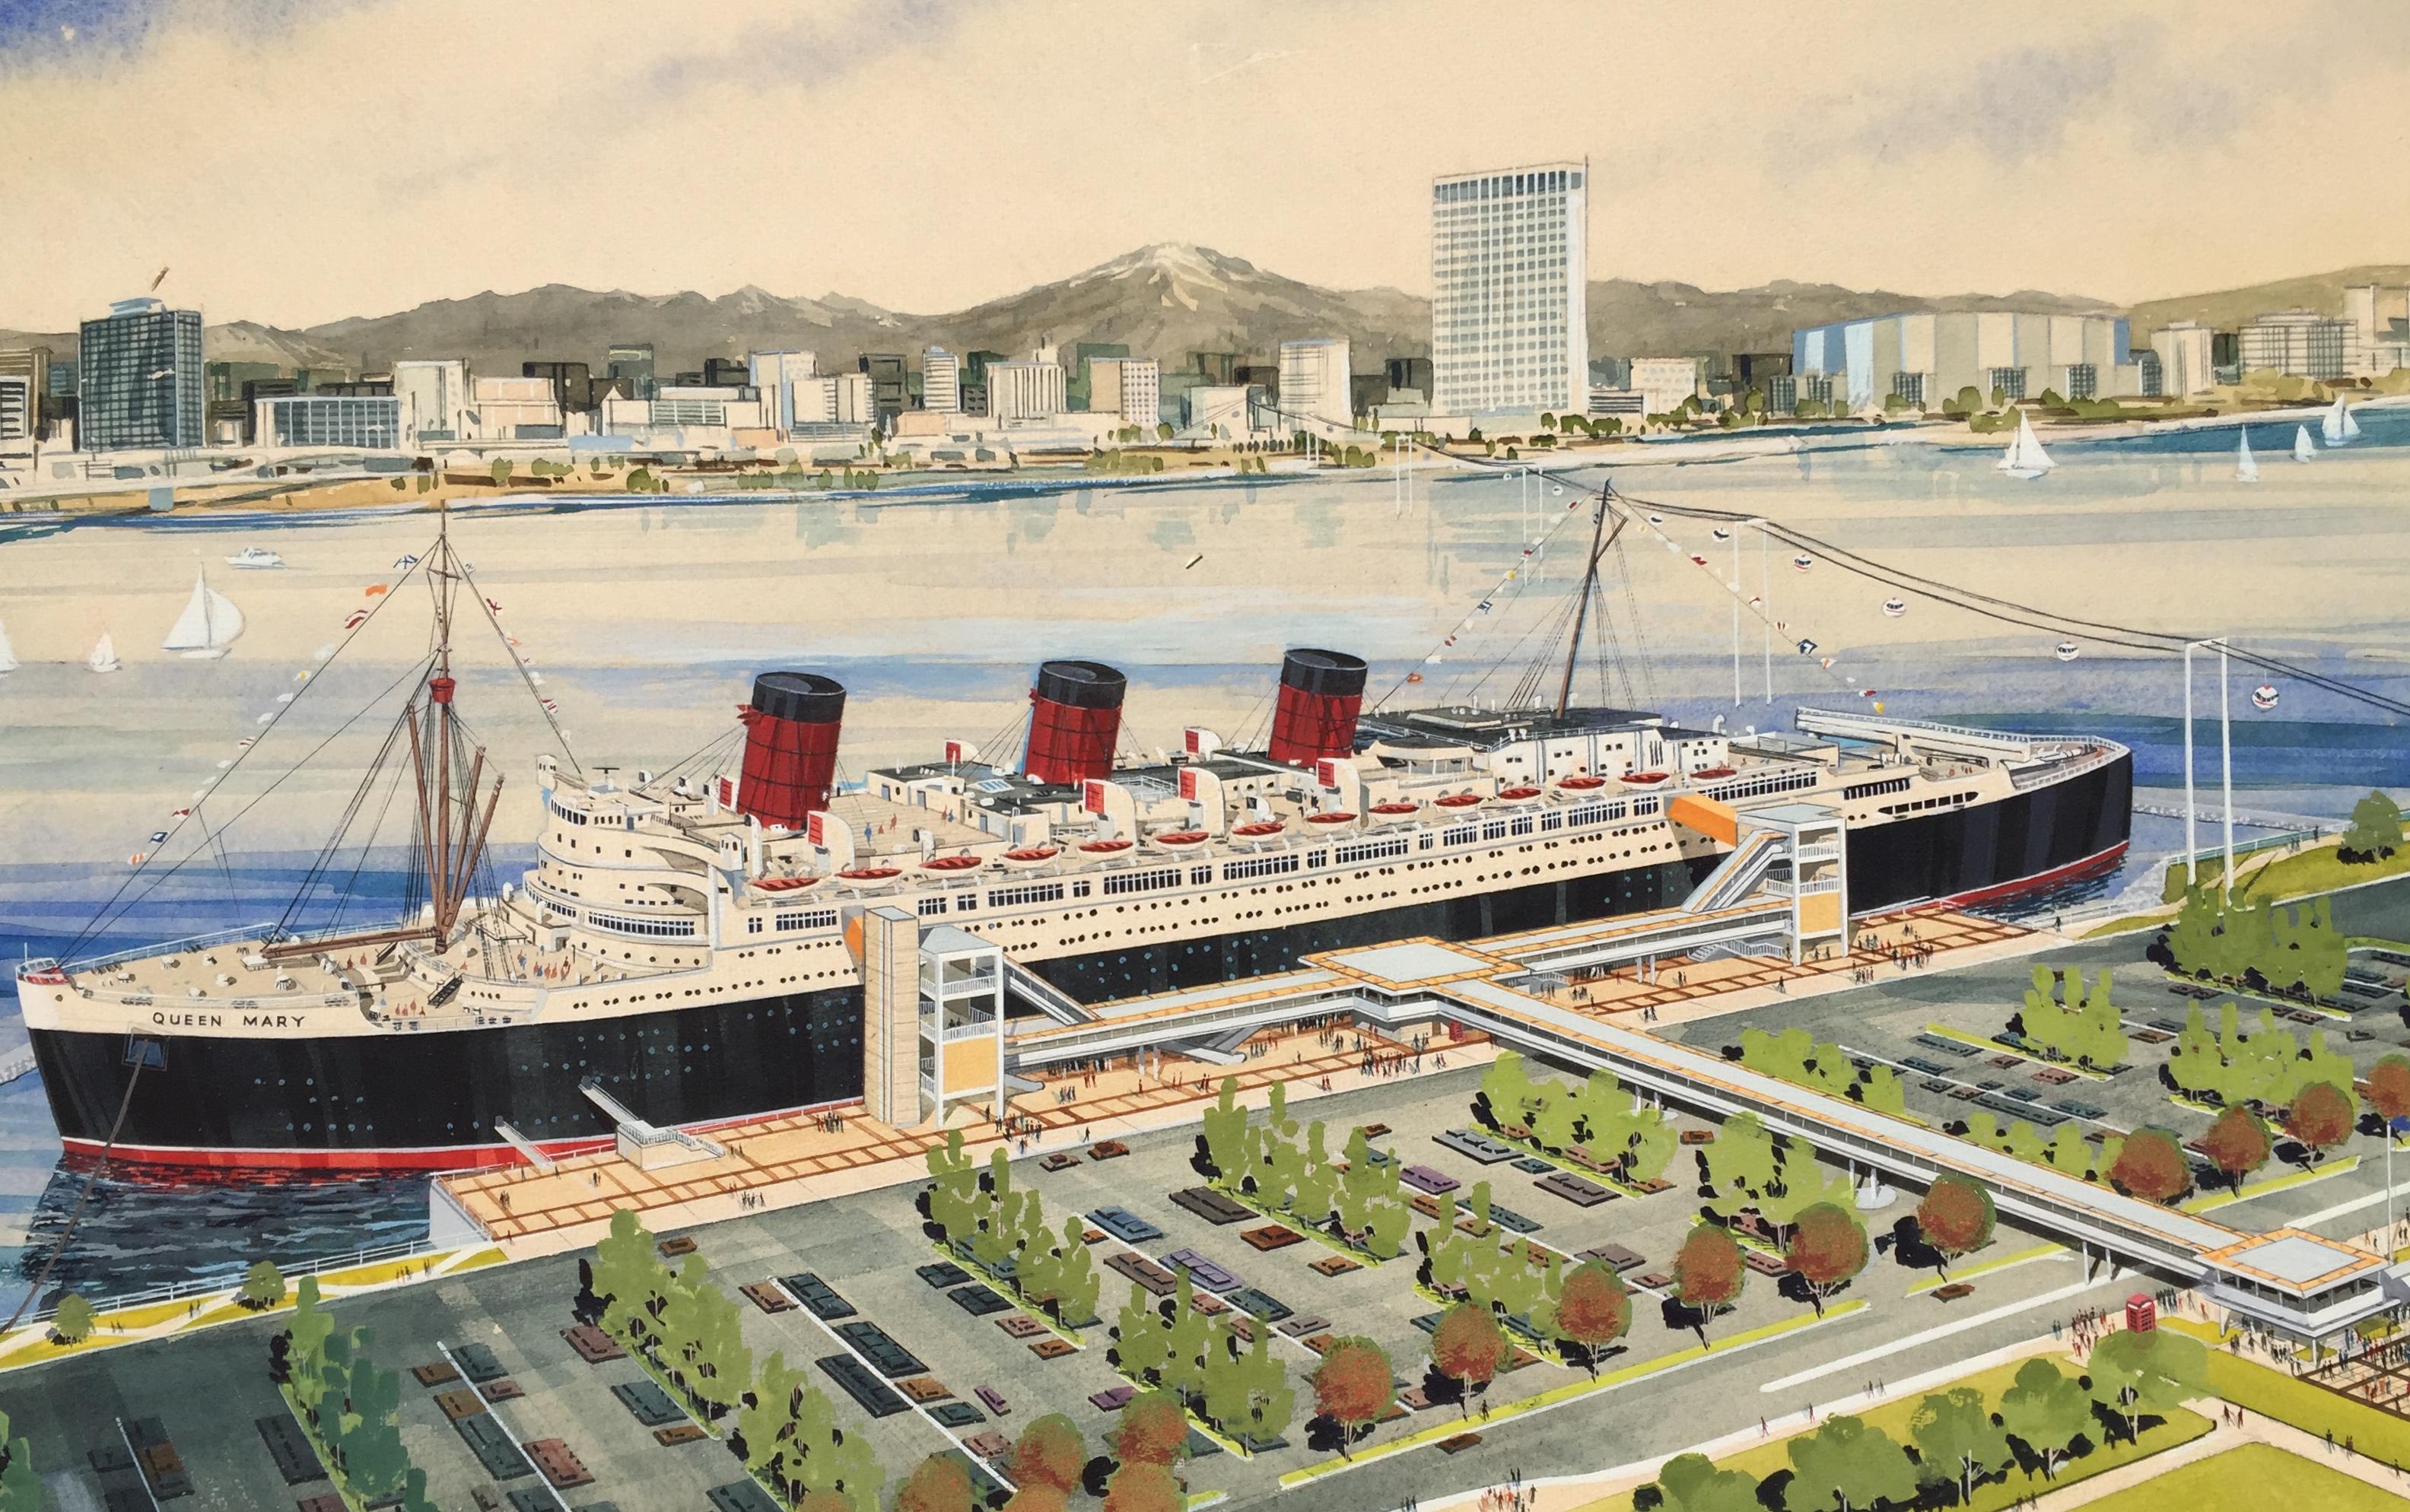 QUEEN MARY,  LONG BEACH, CA -  ORIGINAL ARTIST DESIGN FOR THE PLACEMENT OF THE SHIP 
Watercolor and gouache on board, 20 x 36 inches. Signed and dated by the artist - Segroves, 1969. The original artist concept for the placement in Long Beach Harbor